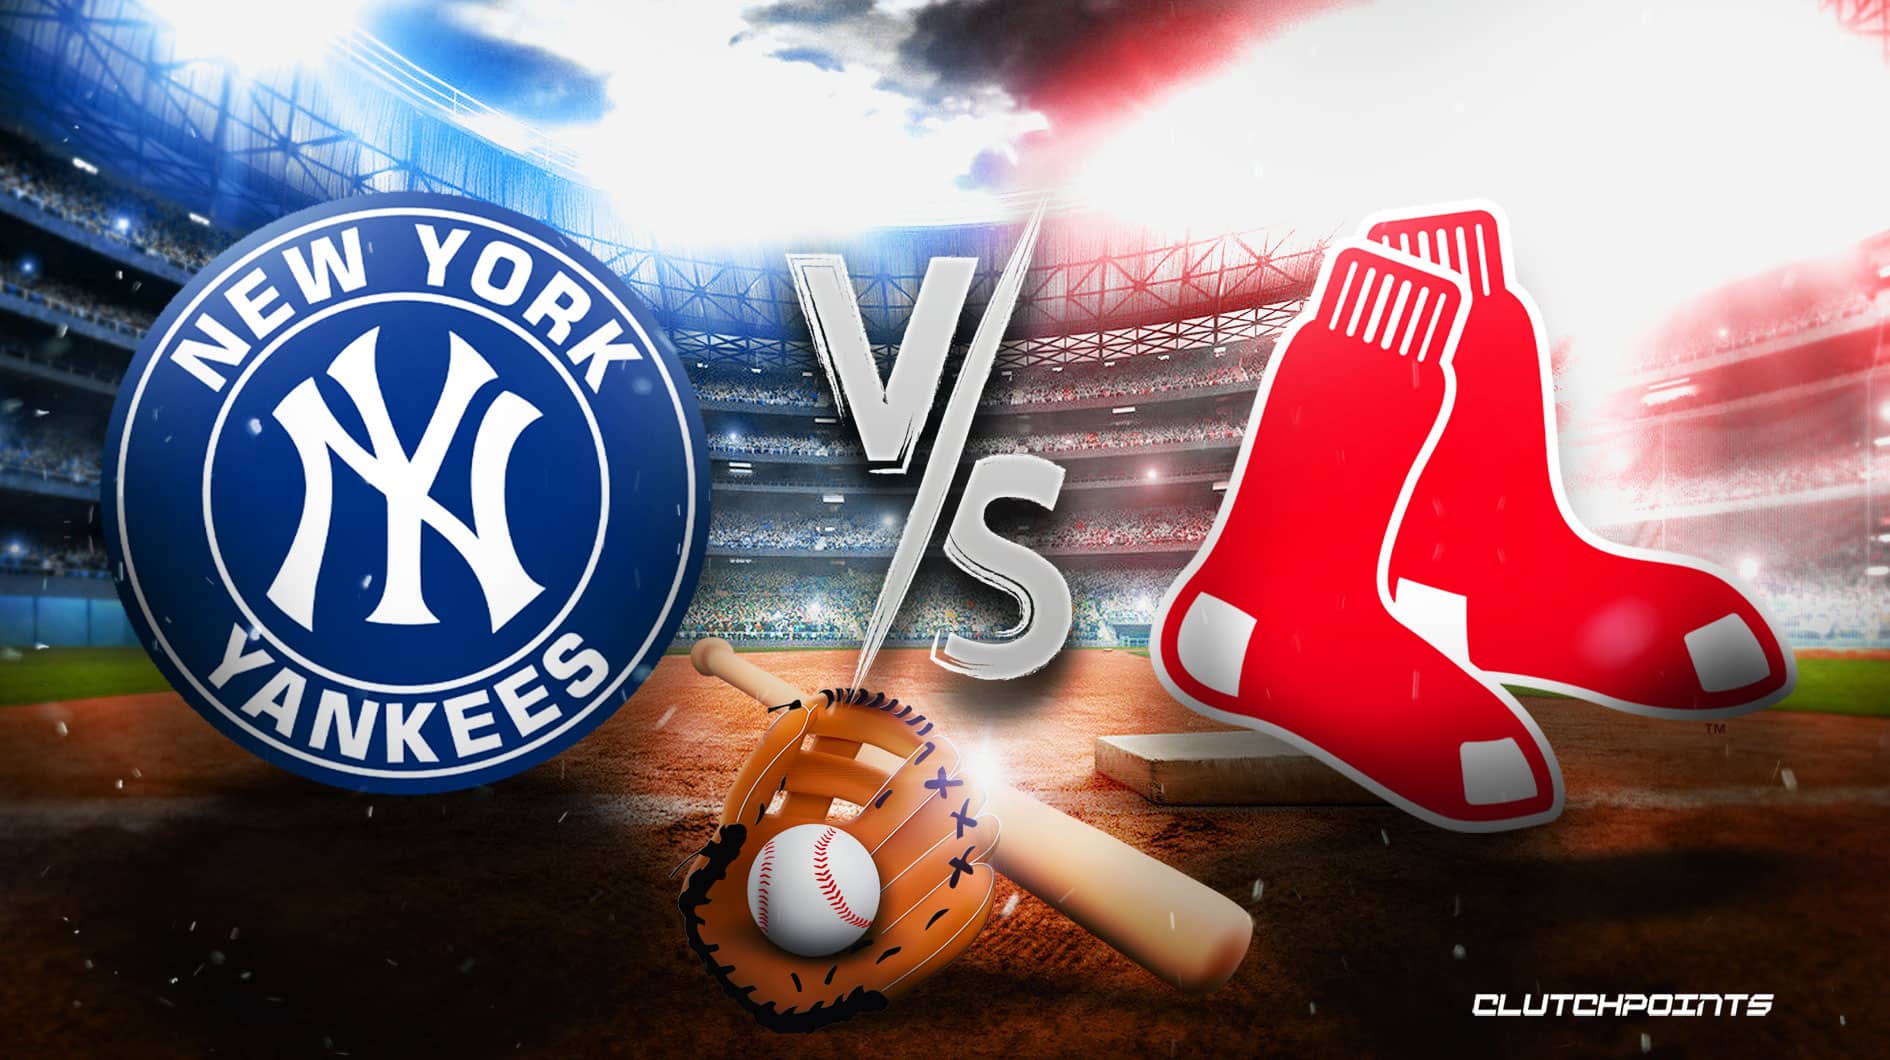 MLB Friday best bets: Red Sox to take opener vs. Yankees